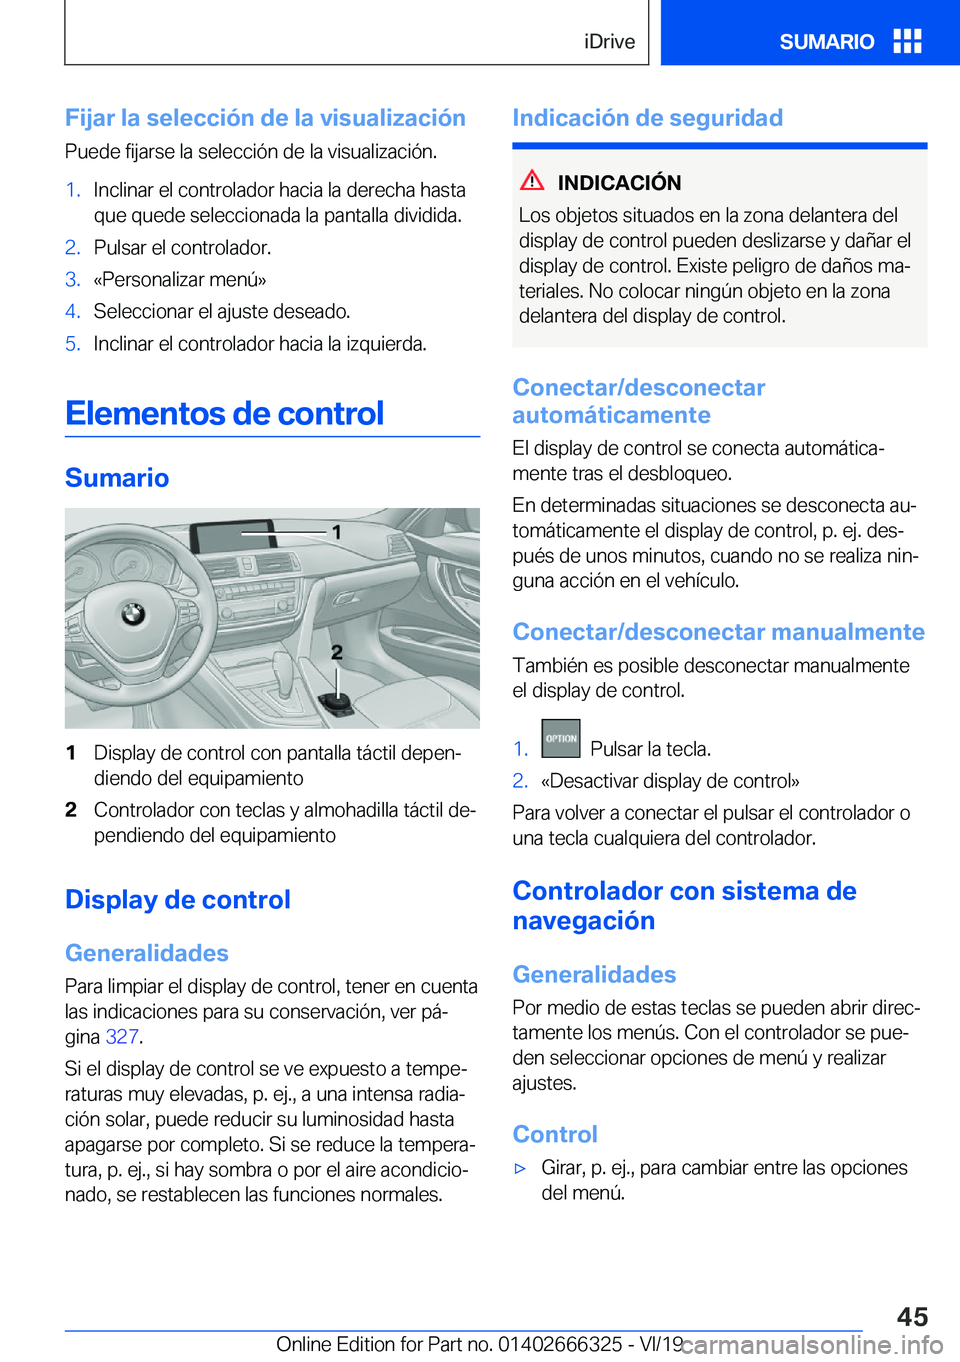 BMW 4 SERIES COUPE 2020  Manuales de Empleo (in Spanish) �F�i�j�a�r��l�a��s�e�l�e�c�c�i�